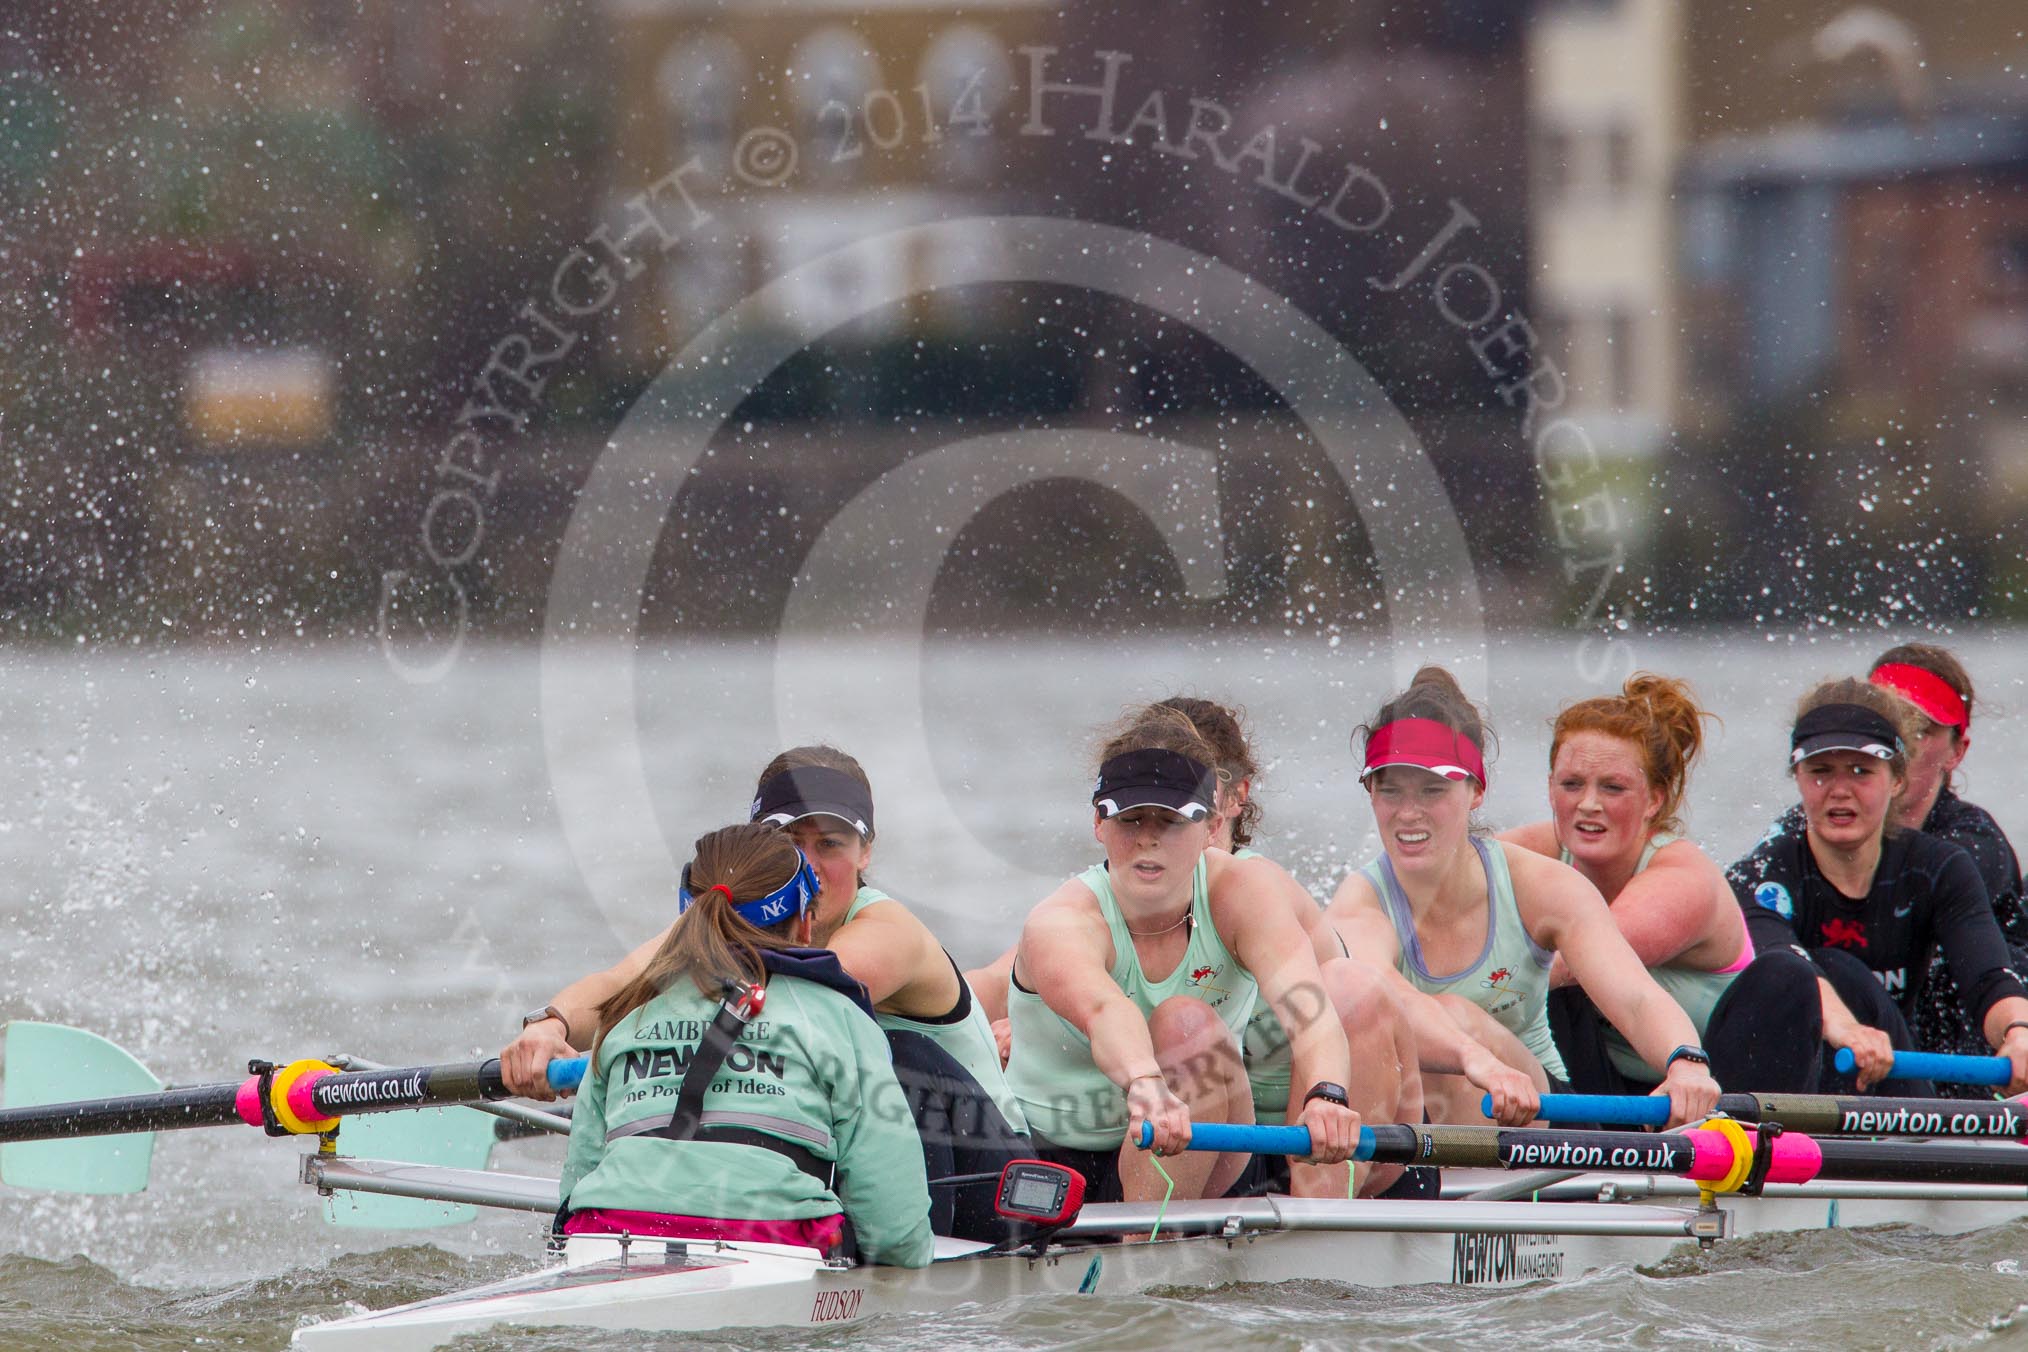 The Boat Race season 2014 - fixture CUWBC vs Thames RC.




on 02 March 2014 at 13:15, image #107